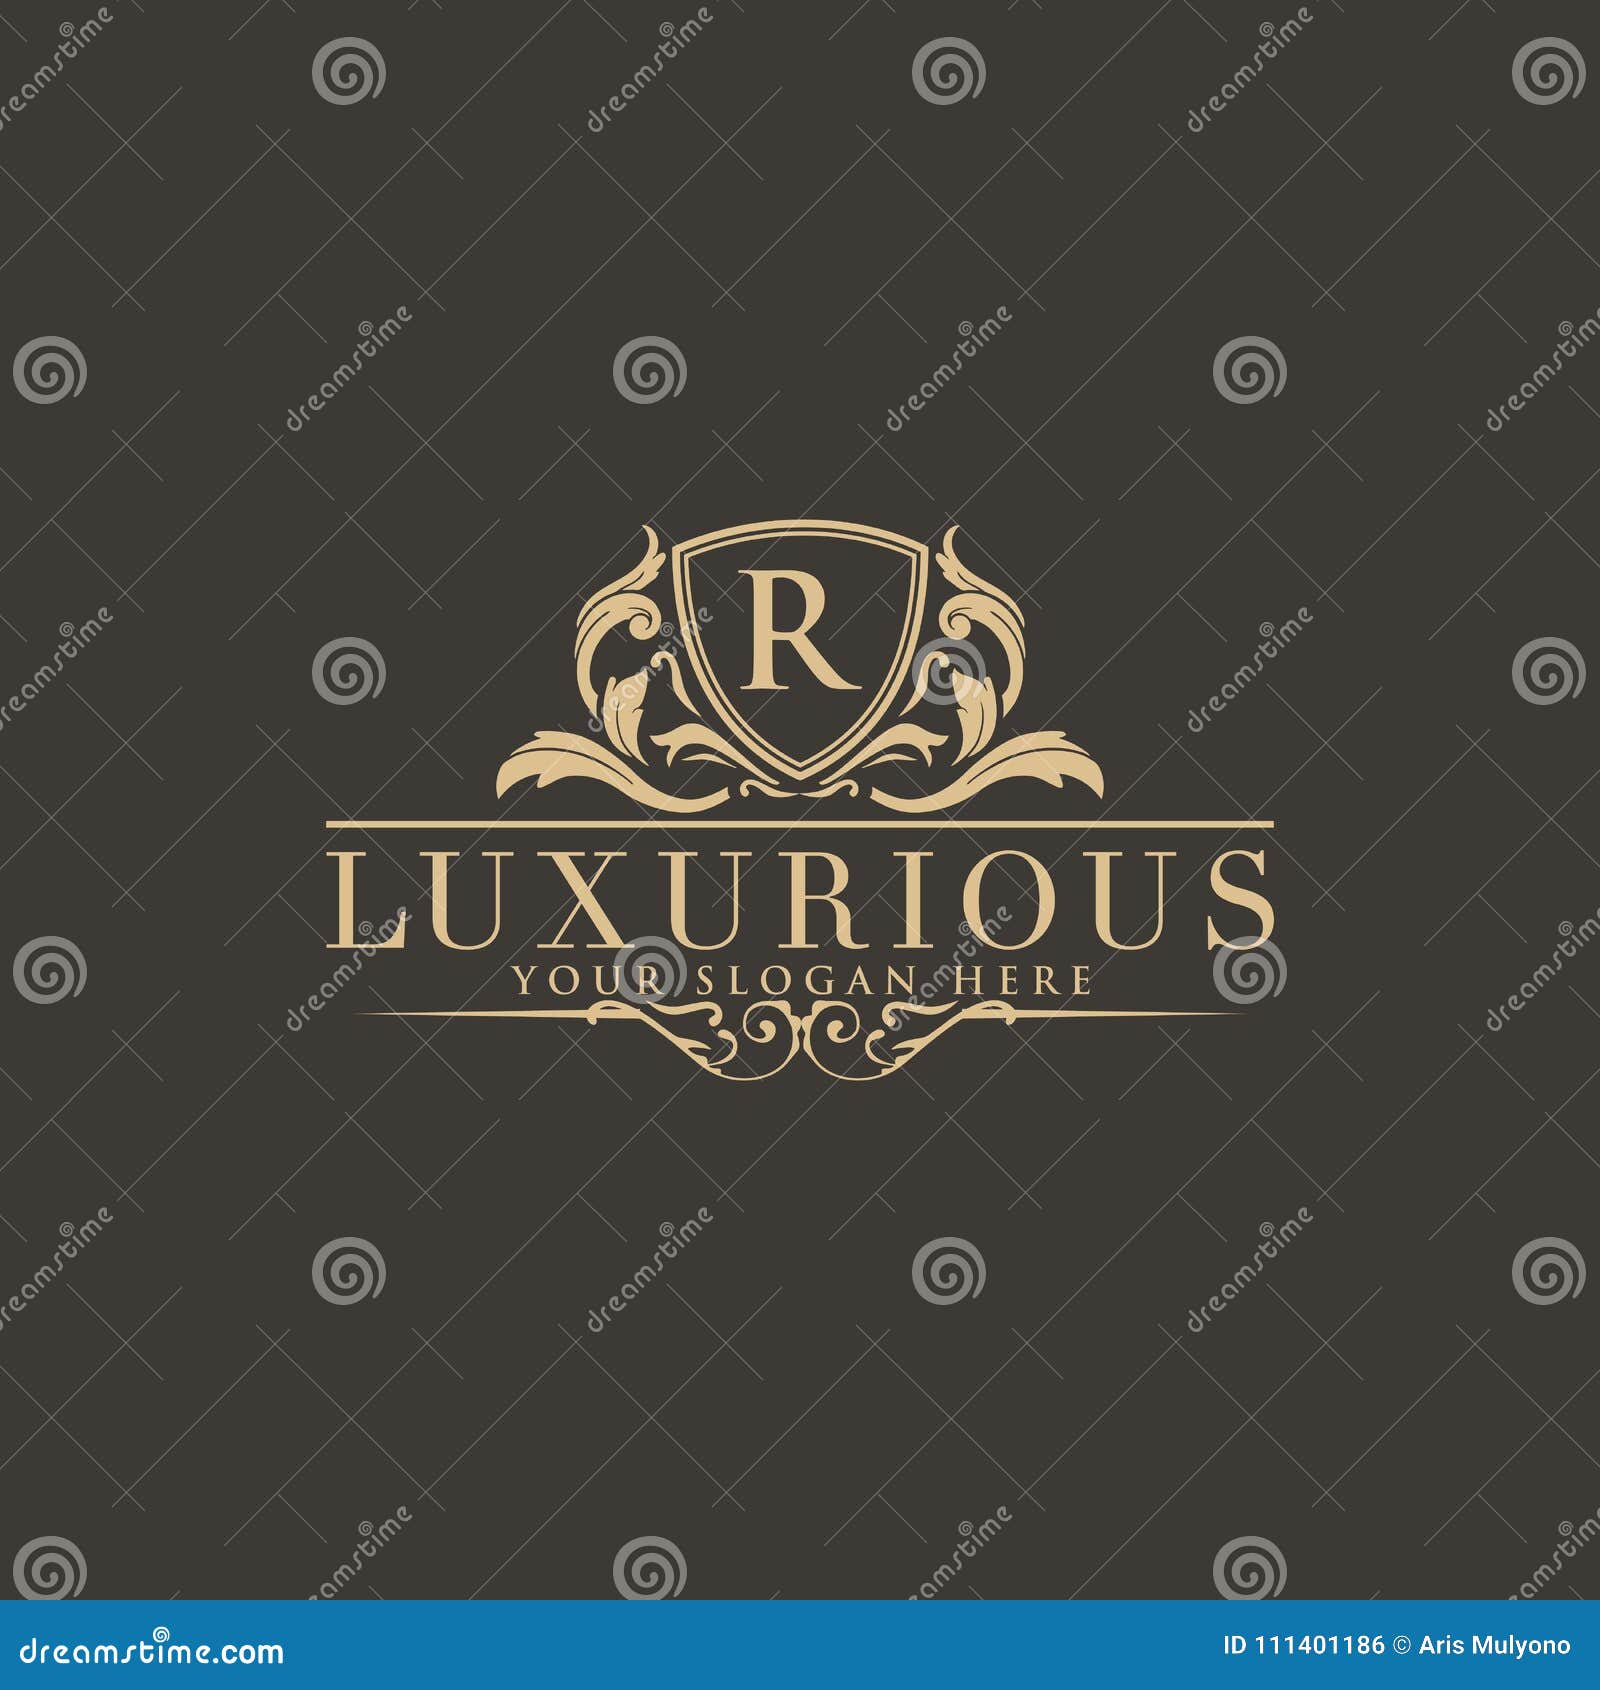 LV Logo monogram with crown up down side design template Stock